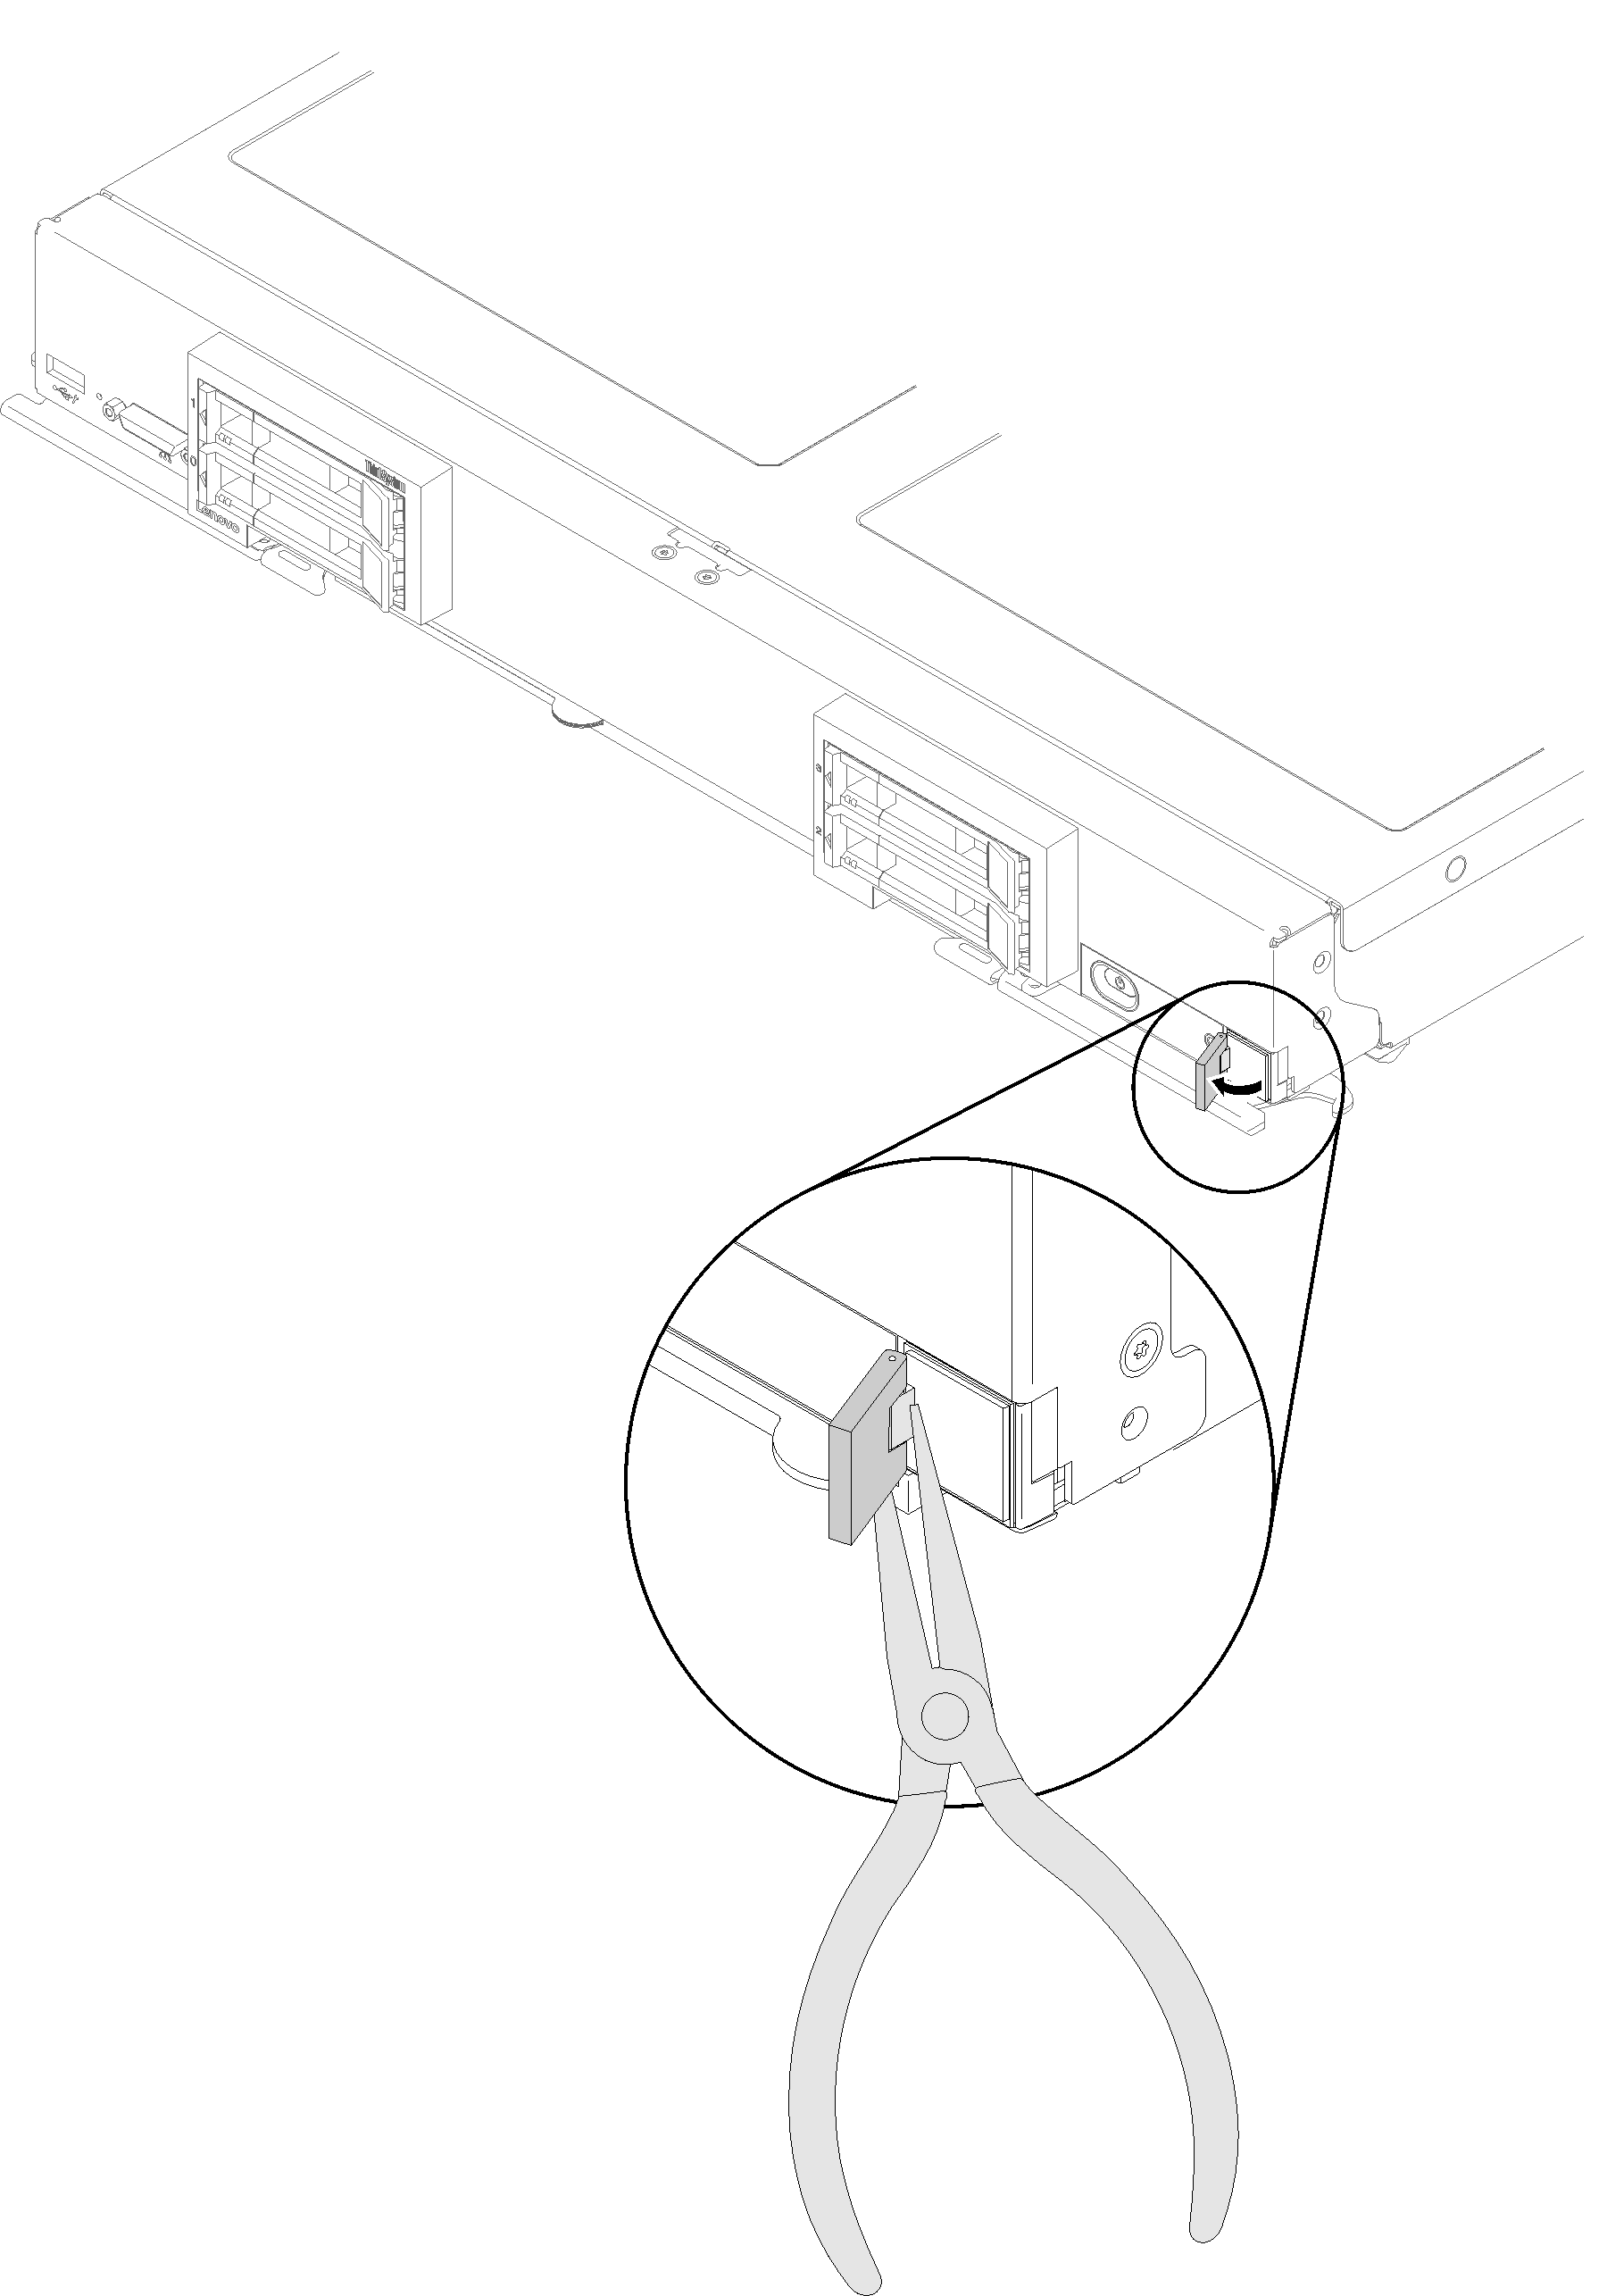 Graphic illustrating removal of the RFID tag